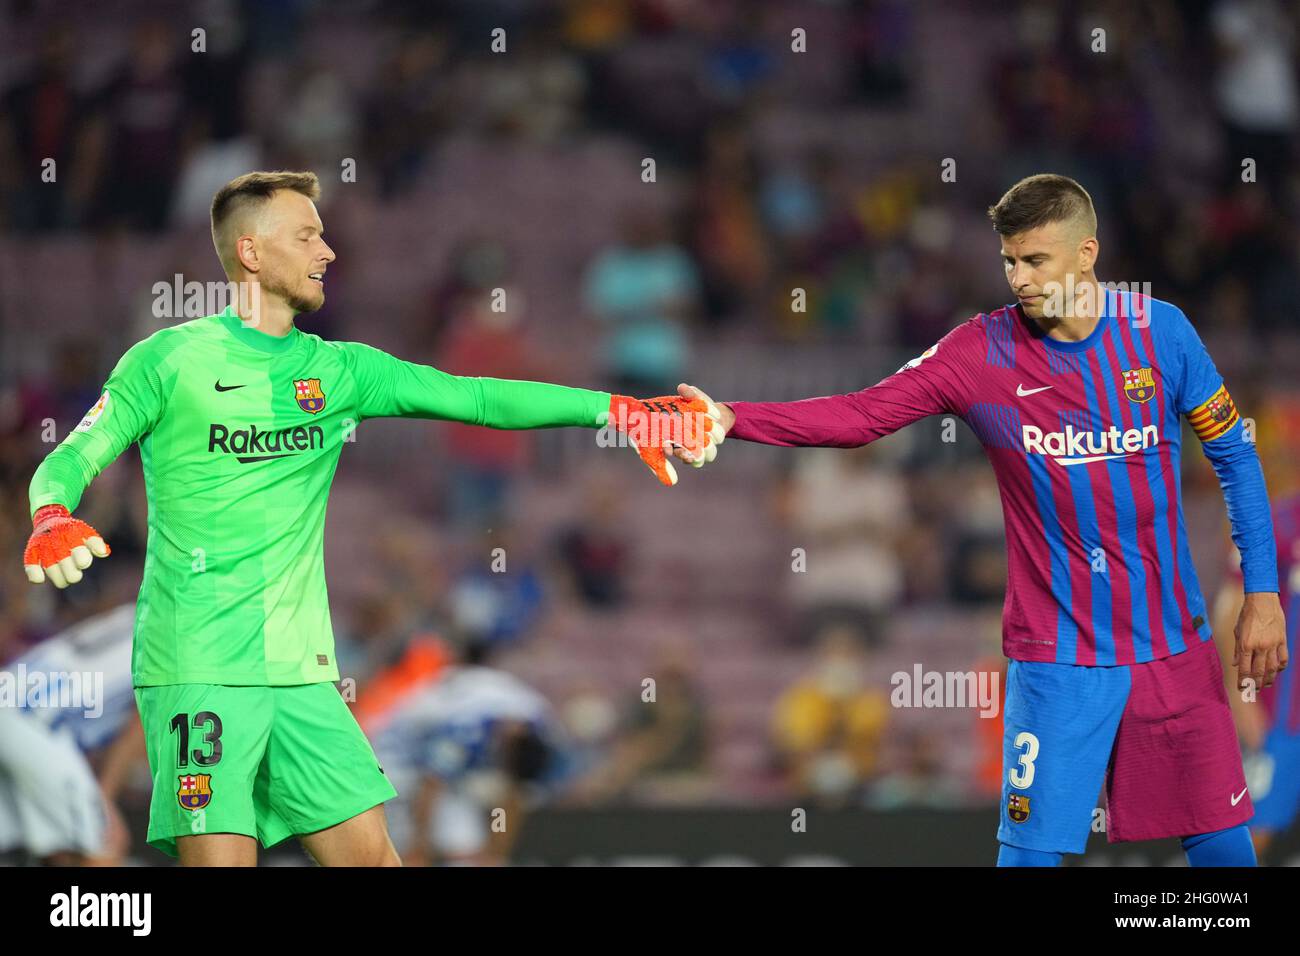 Norberto Murara Neto and Gerard Pique of FC Barcelona during the La Liga match between FC Barcelona and Real Sociedad played at Camp Nou Stadium on August 15, 2021 in Barcelona, Spain. (Photo by PRESSINPHOTO) Stock Photo